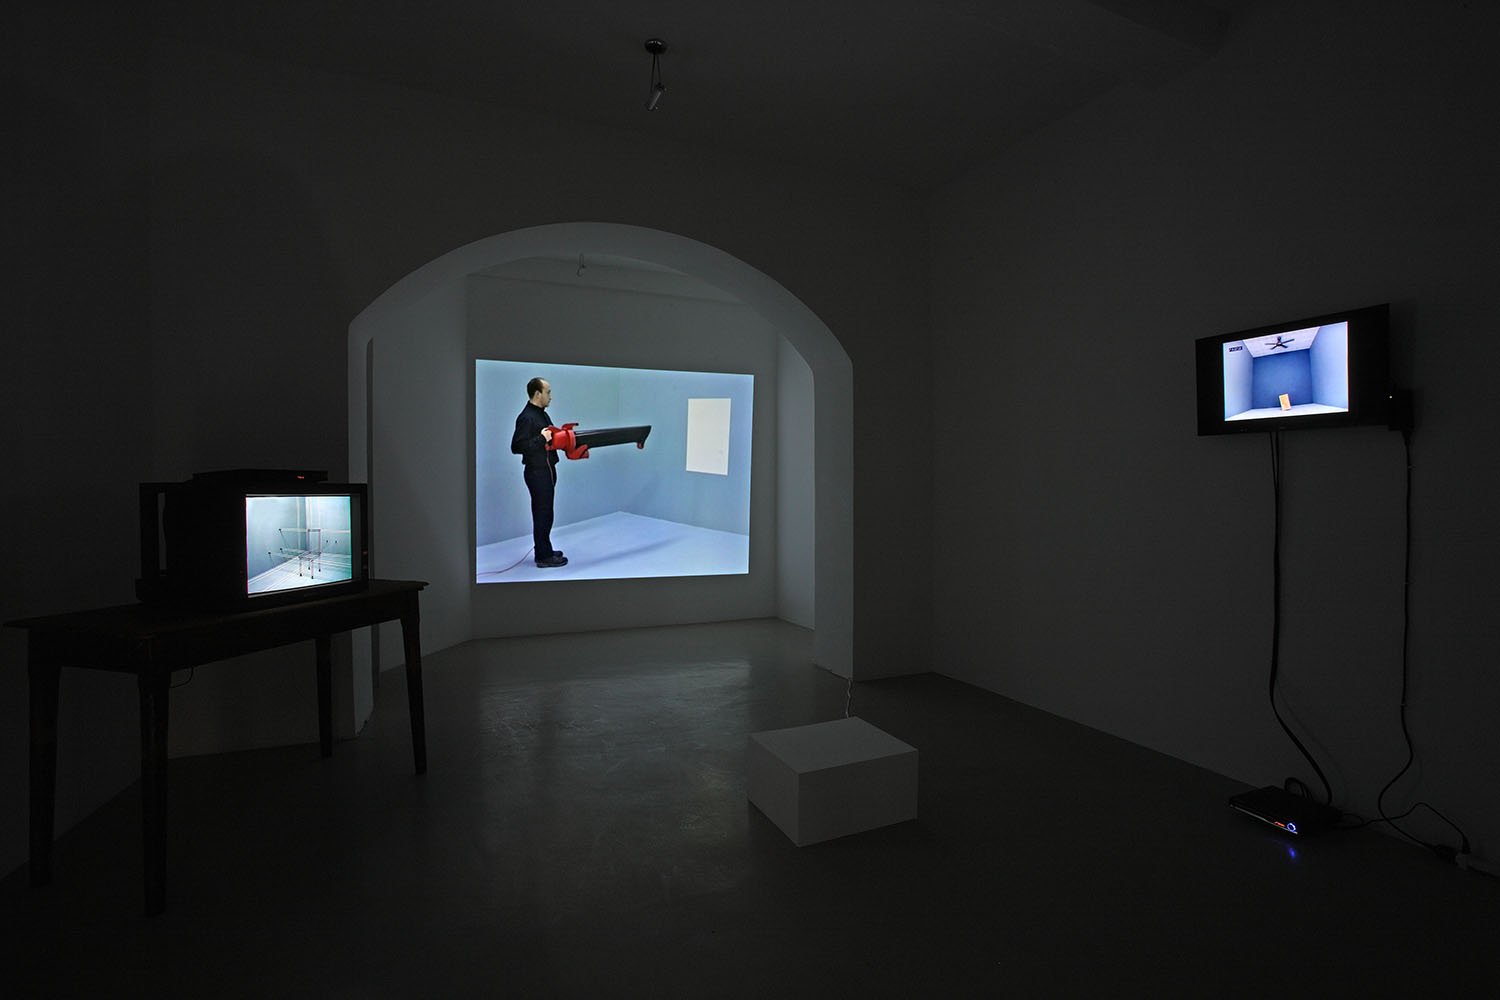 Twenty Six (Drawing and Falling Things), Table and Chairs, 2001, video installation